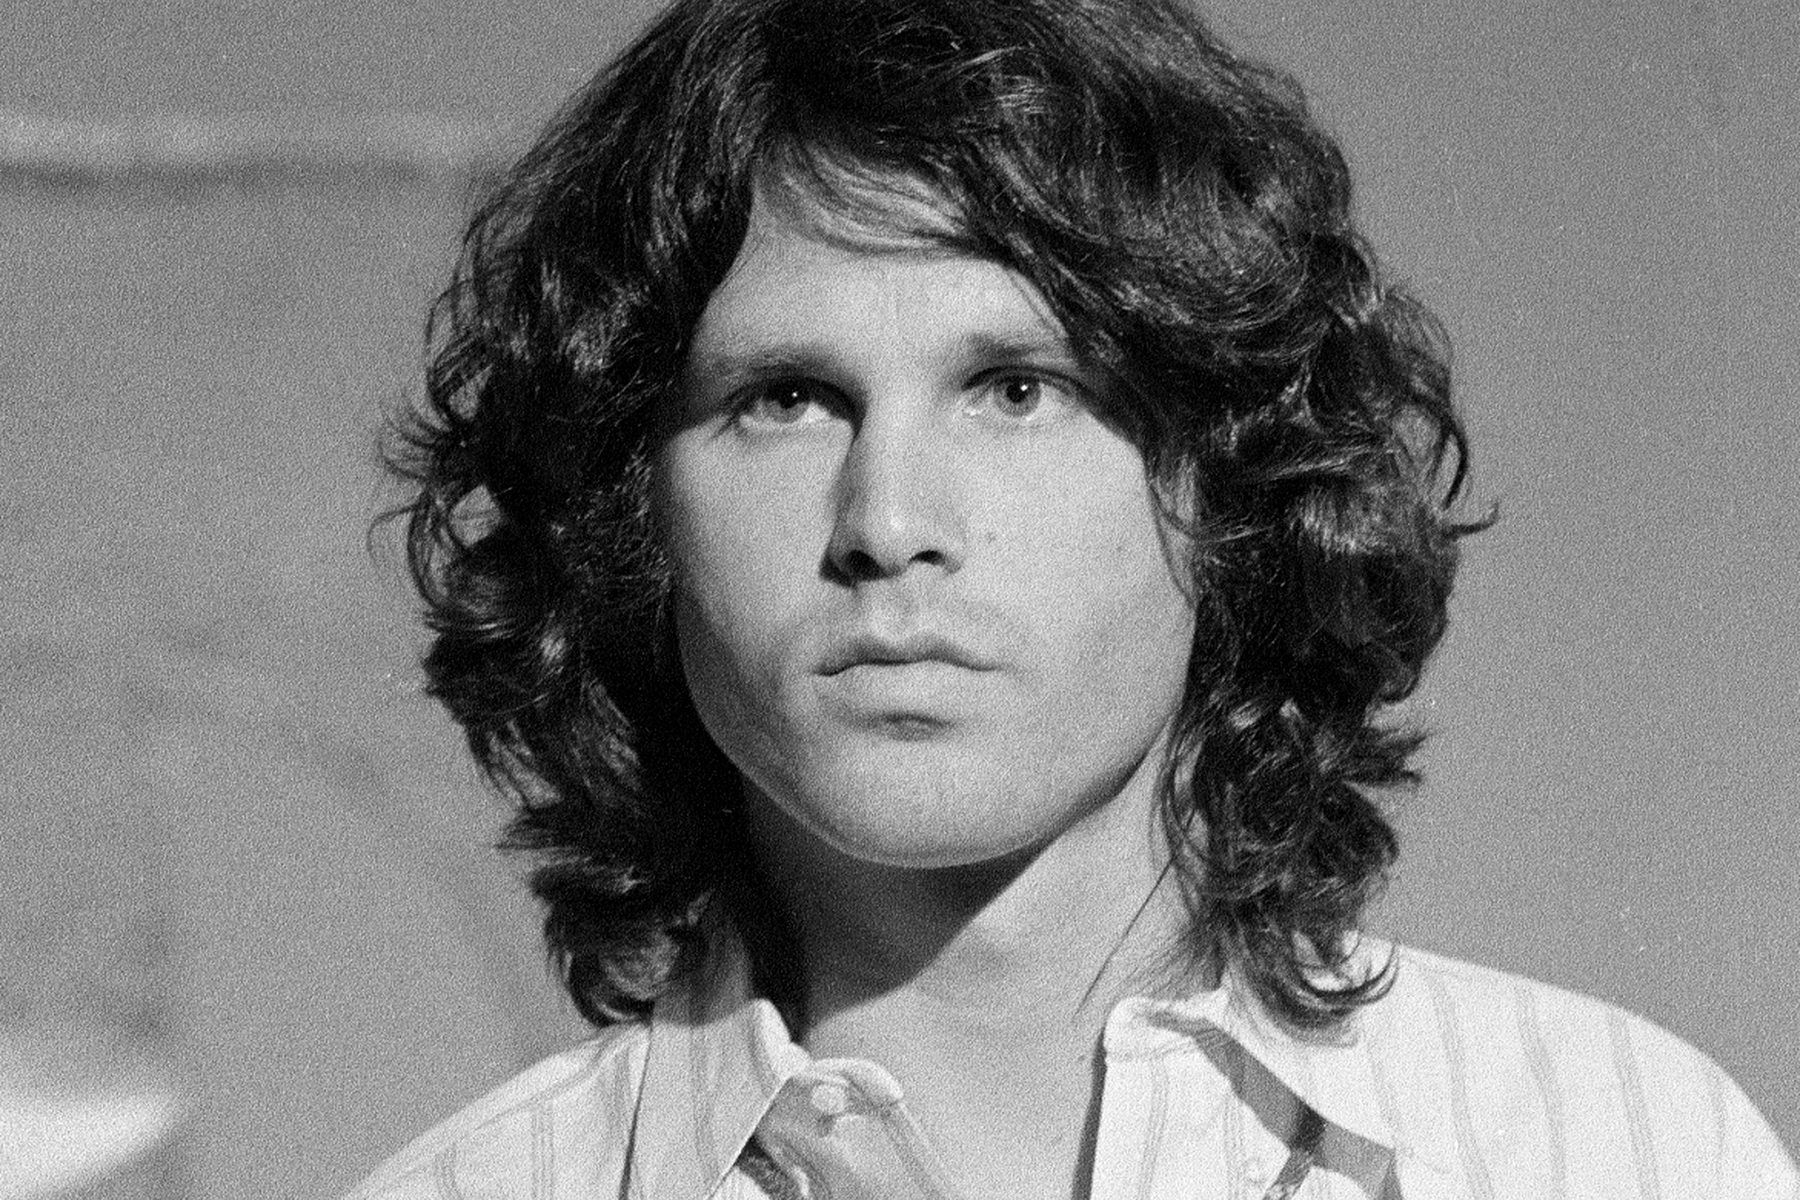 Jim morrison rolling stone interview with the doors singer